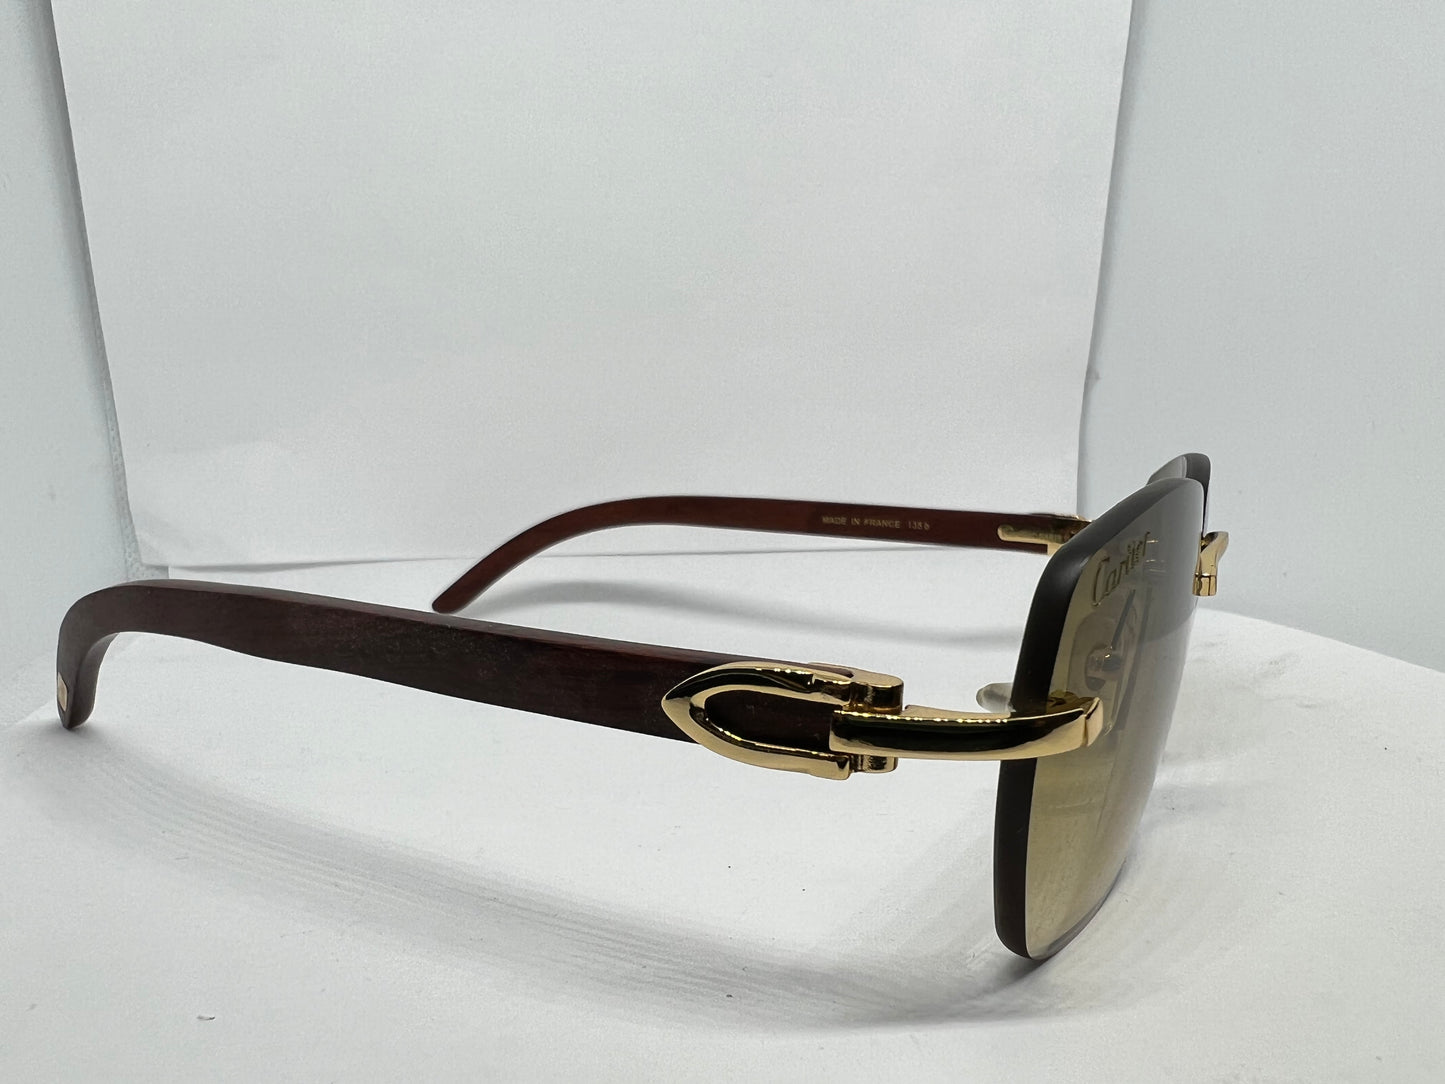 Classic Cartier Brown Arms & Gold Frames w/ Olive Tinted Lenses